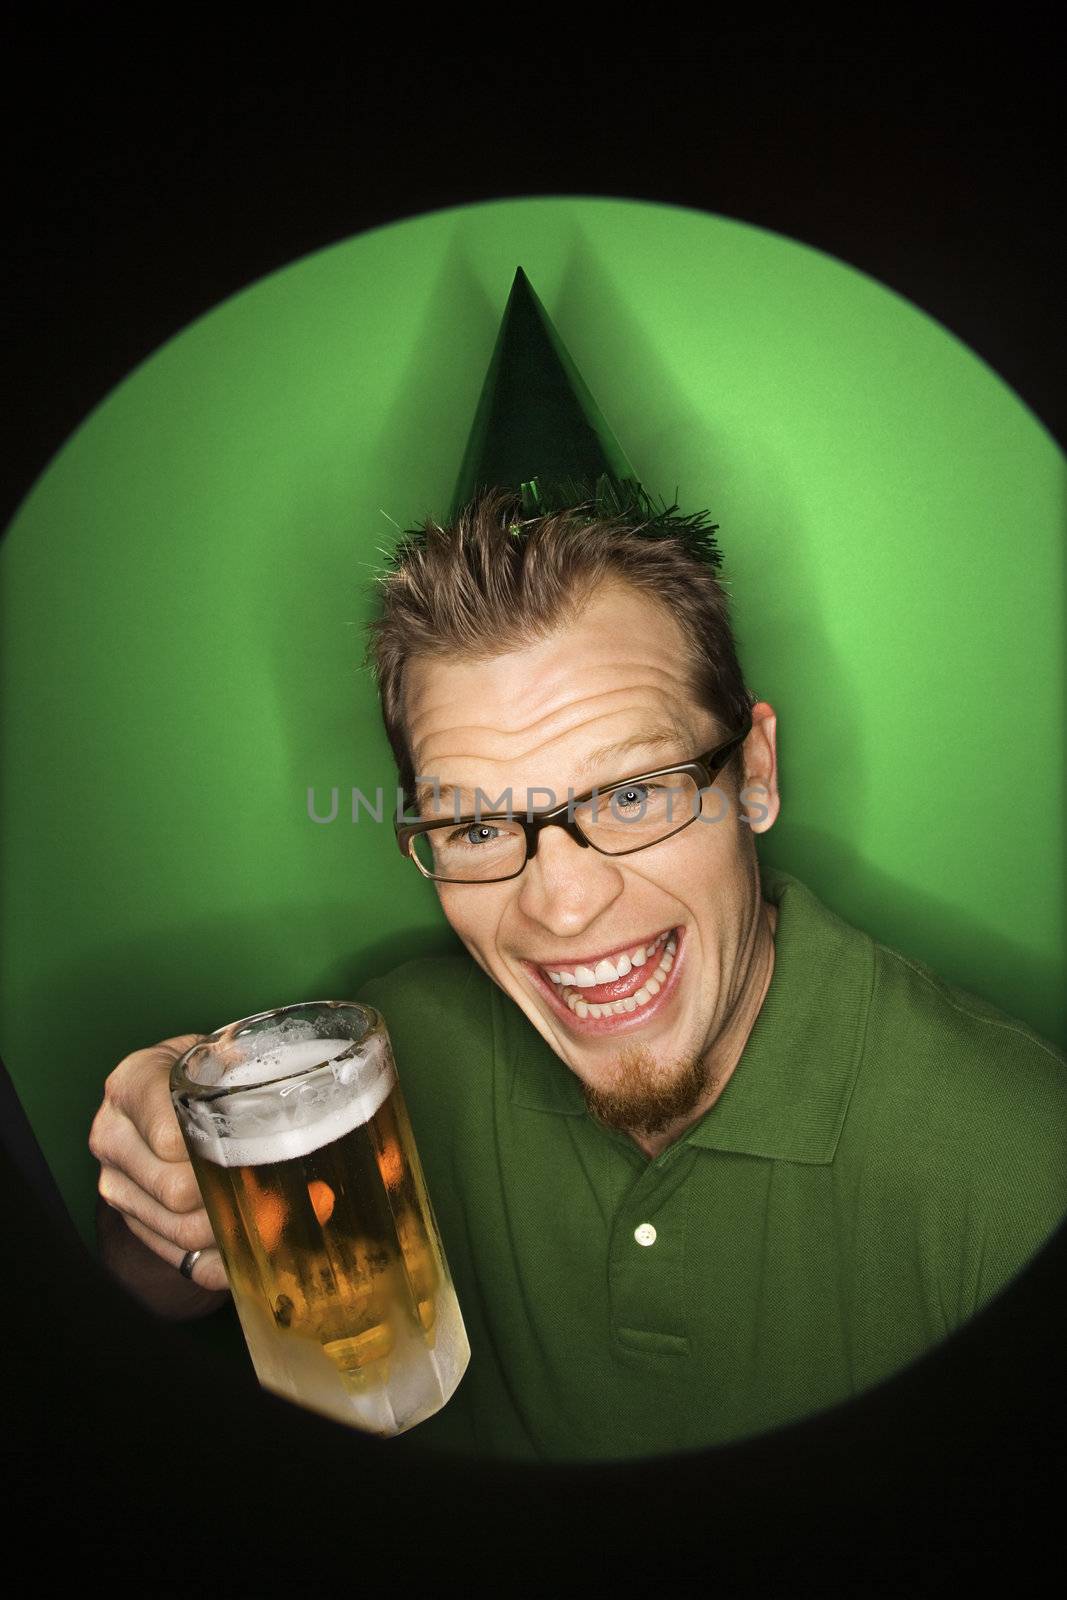 Vignette of adult Caucasian man on green background wearing green hat and holding beer.